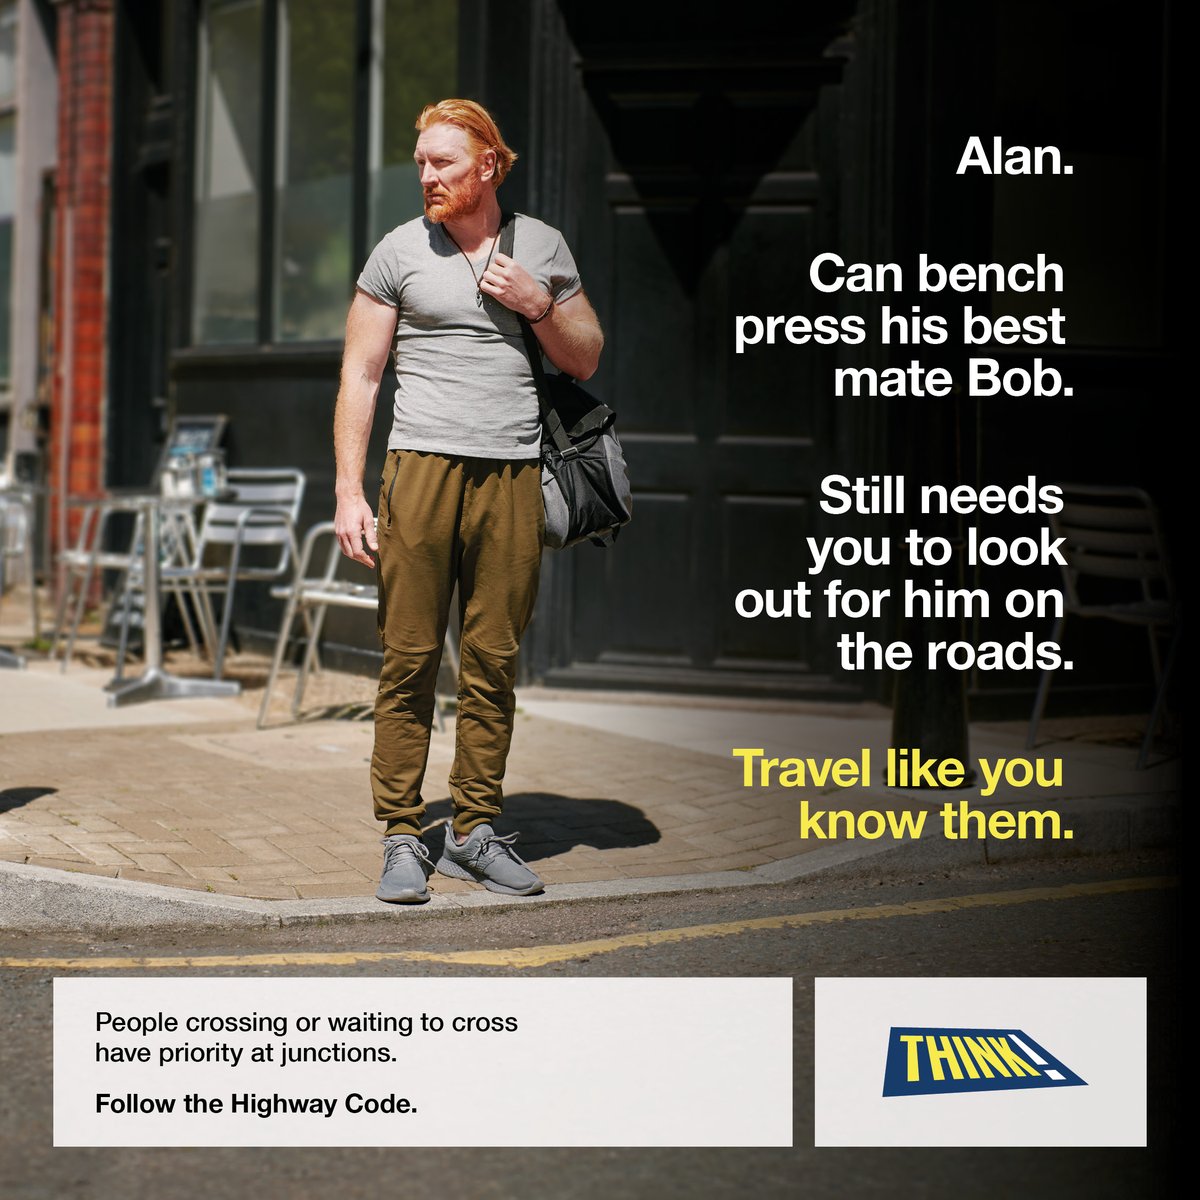 Time for a #HighwayCode refresher?

People crossing, waiting to cross or cycling straight ahead have priority at junctions. #TravelLikeYouKnowThem

Find out more here orlo.uk/EVATc